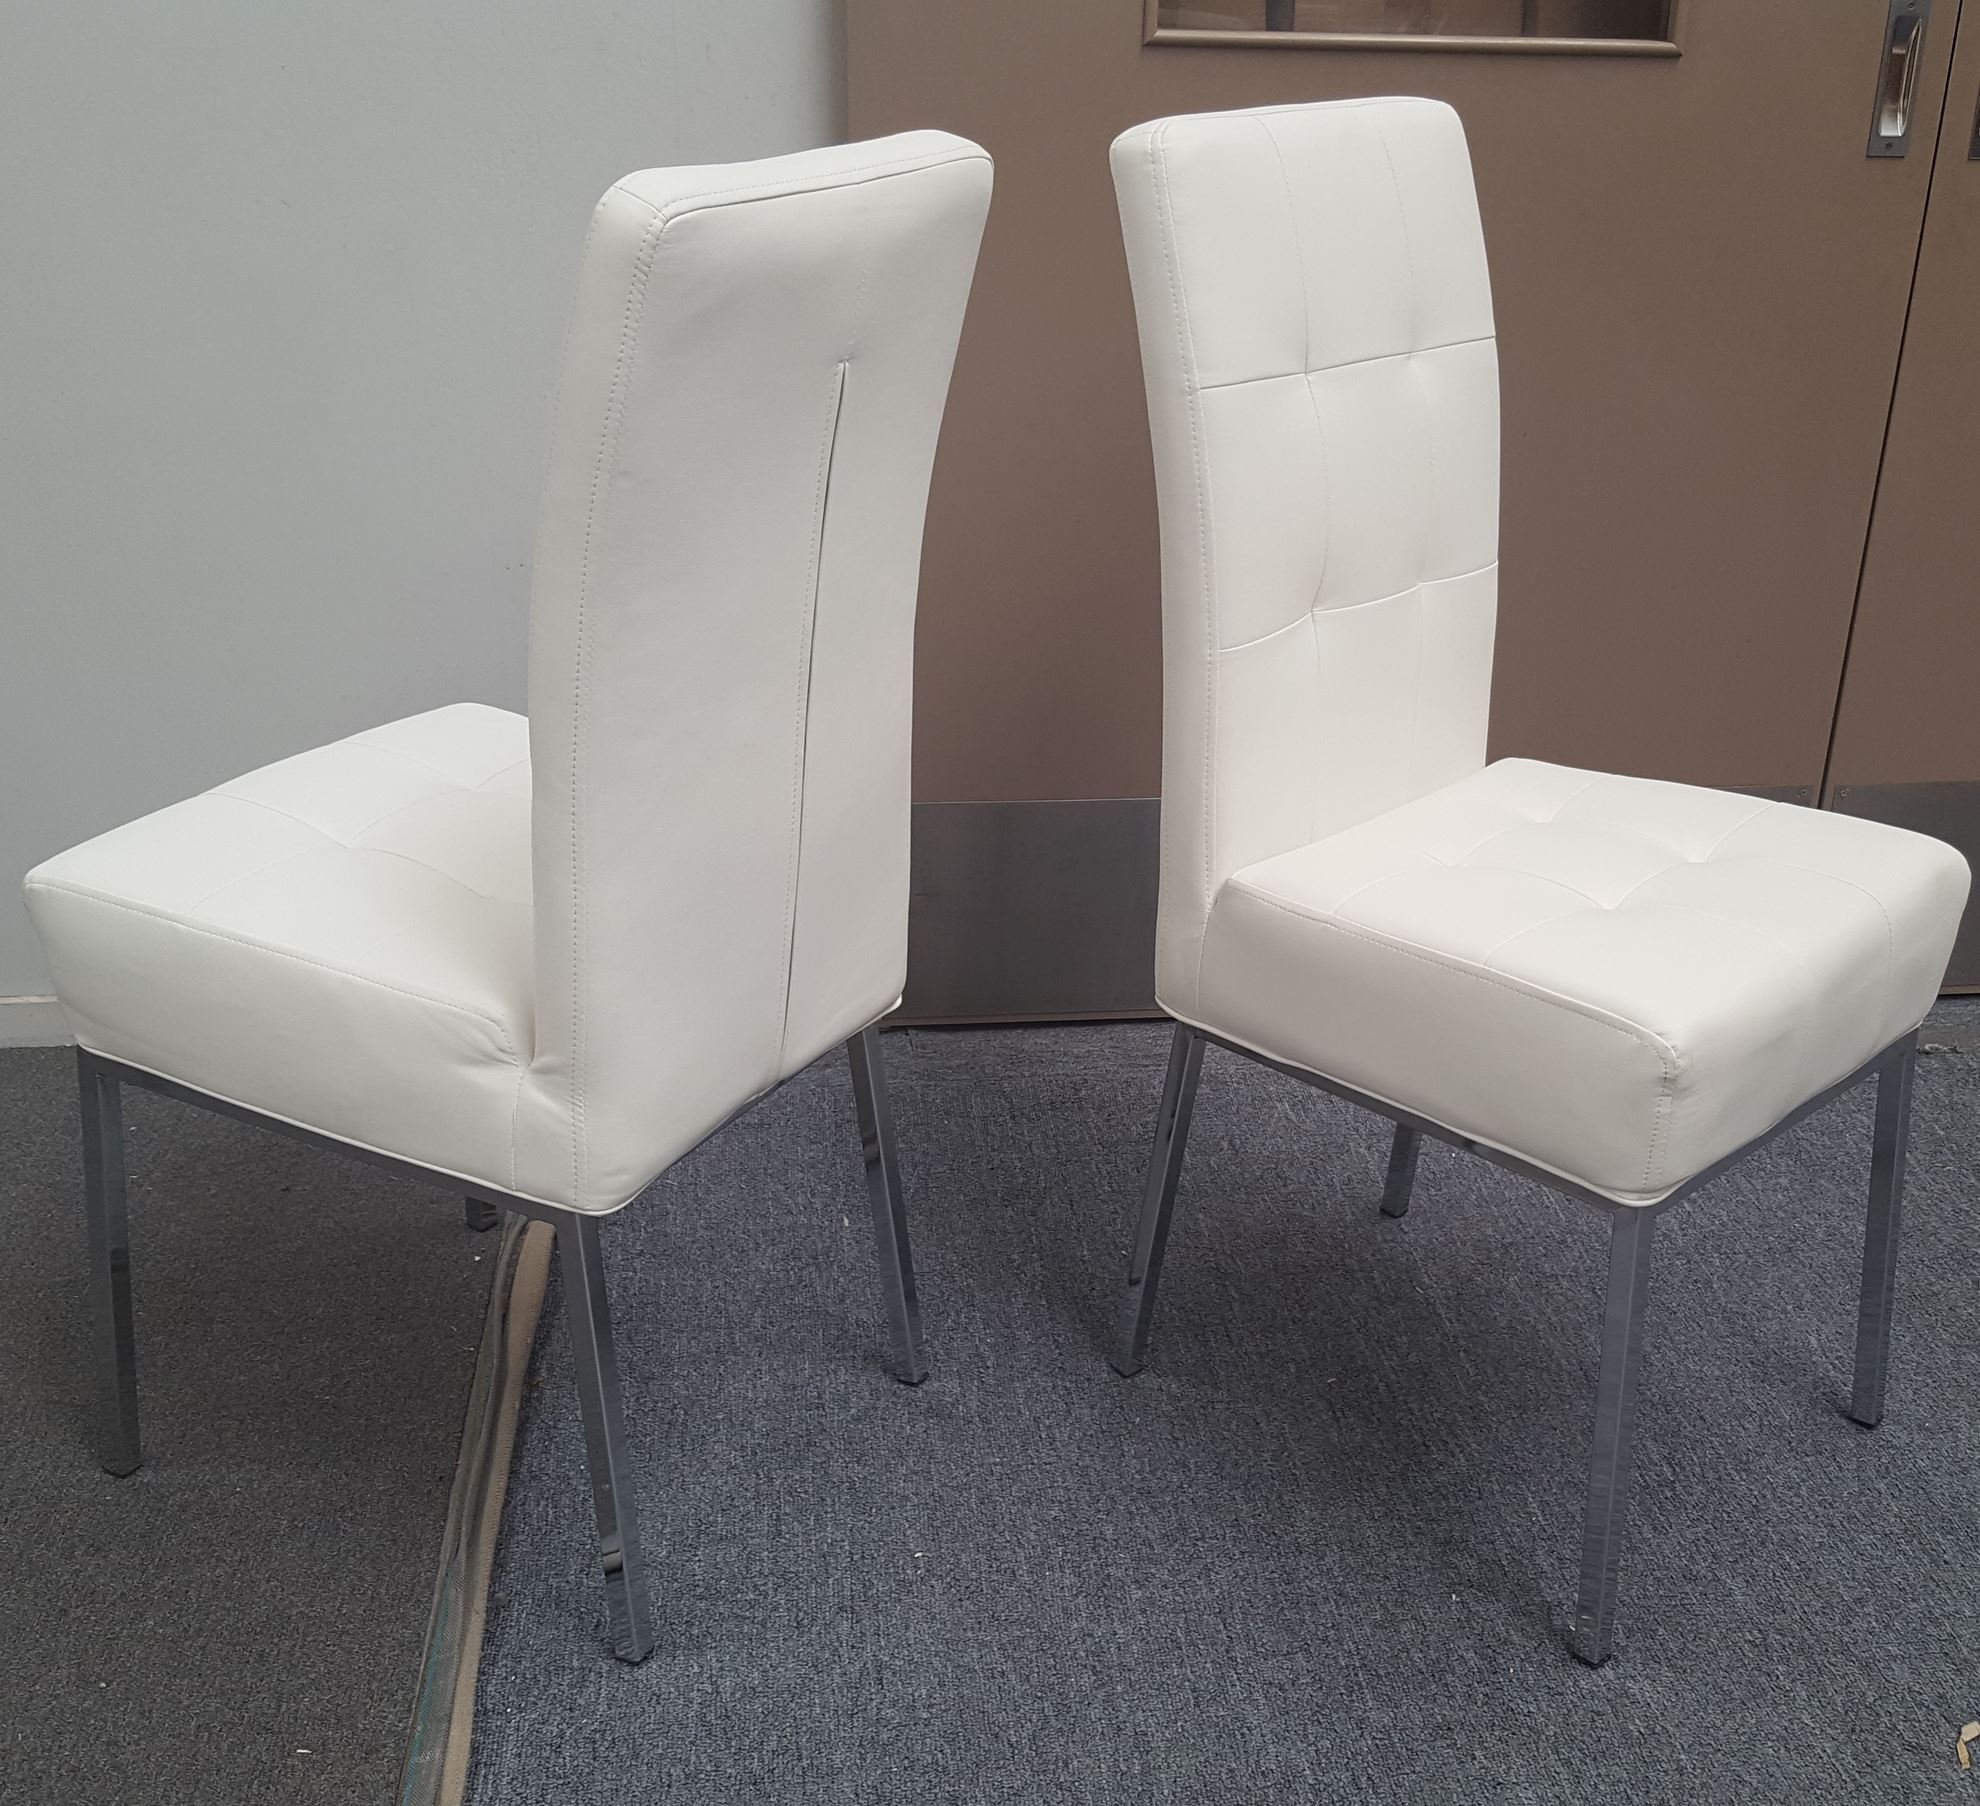 Nobel Dining Chair White Pu Leather, White Leather Parsons Chairs